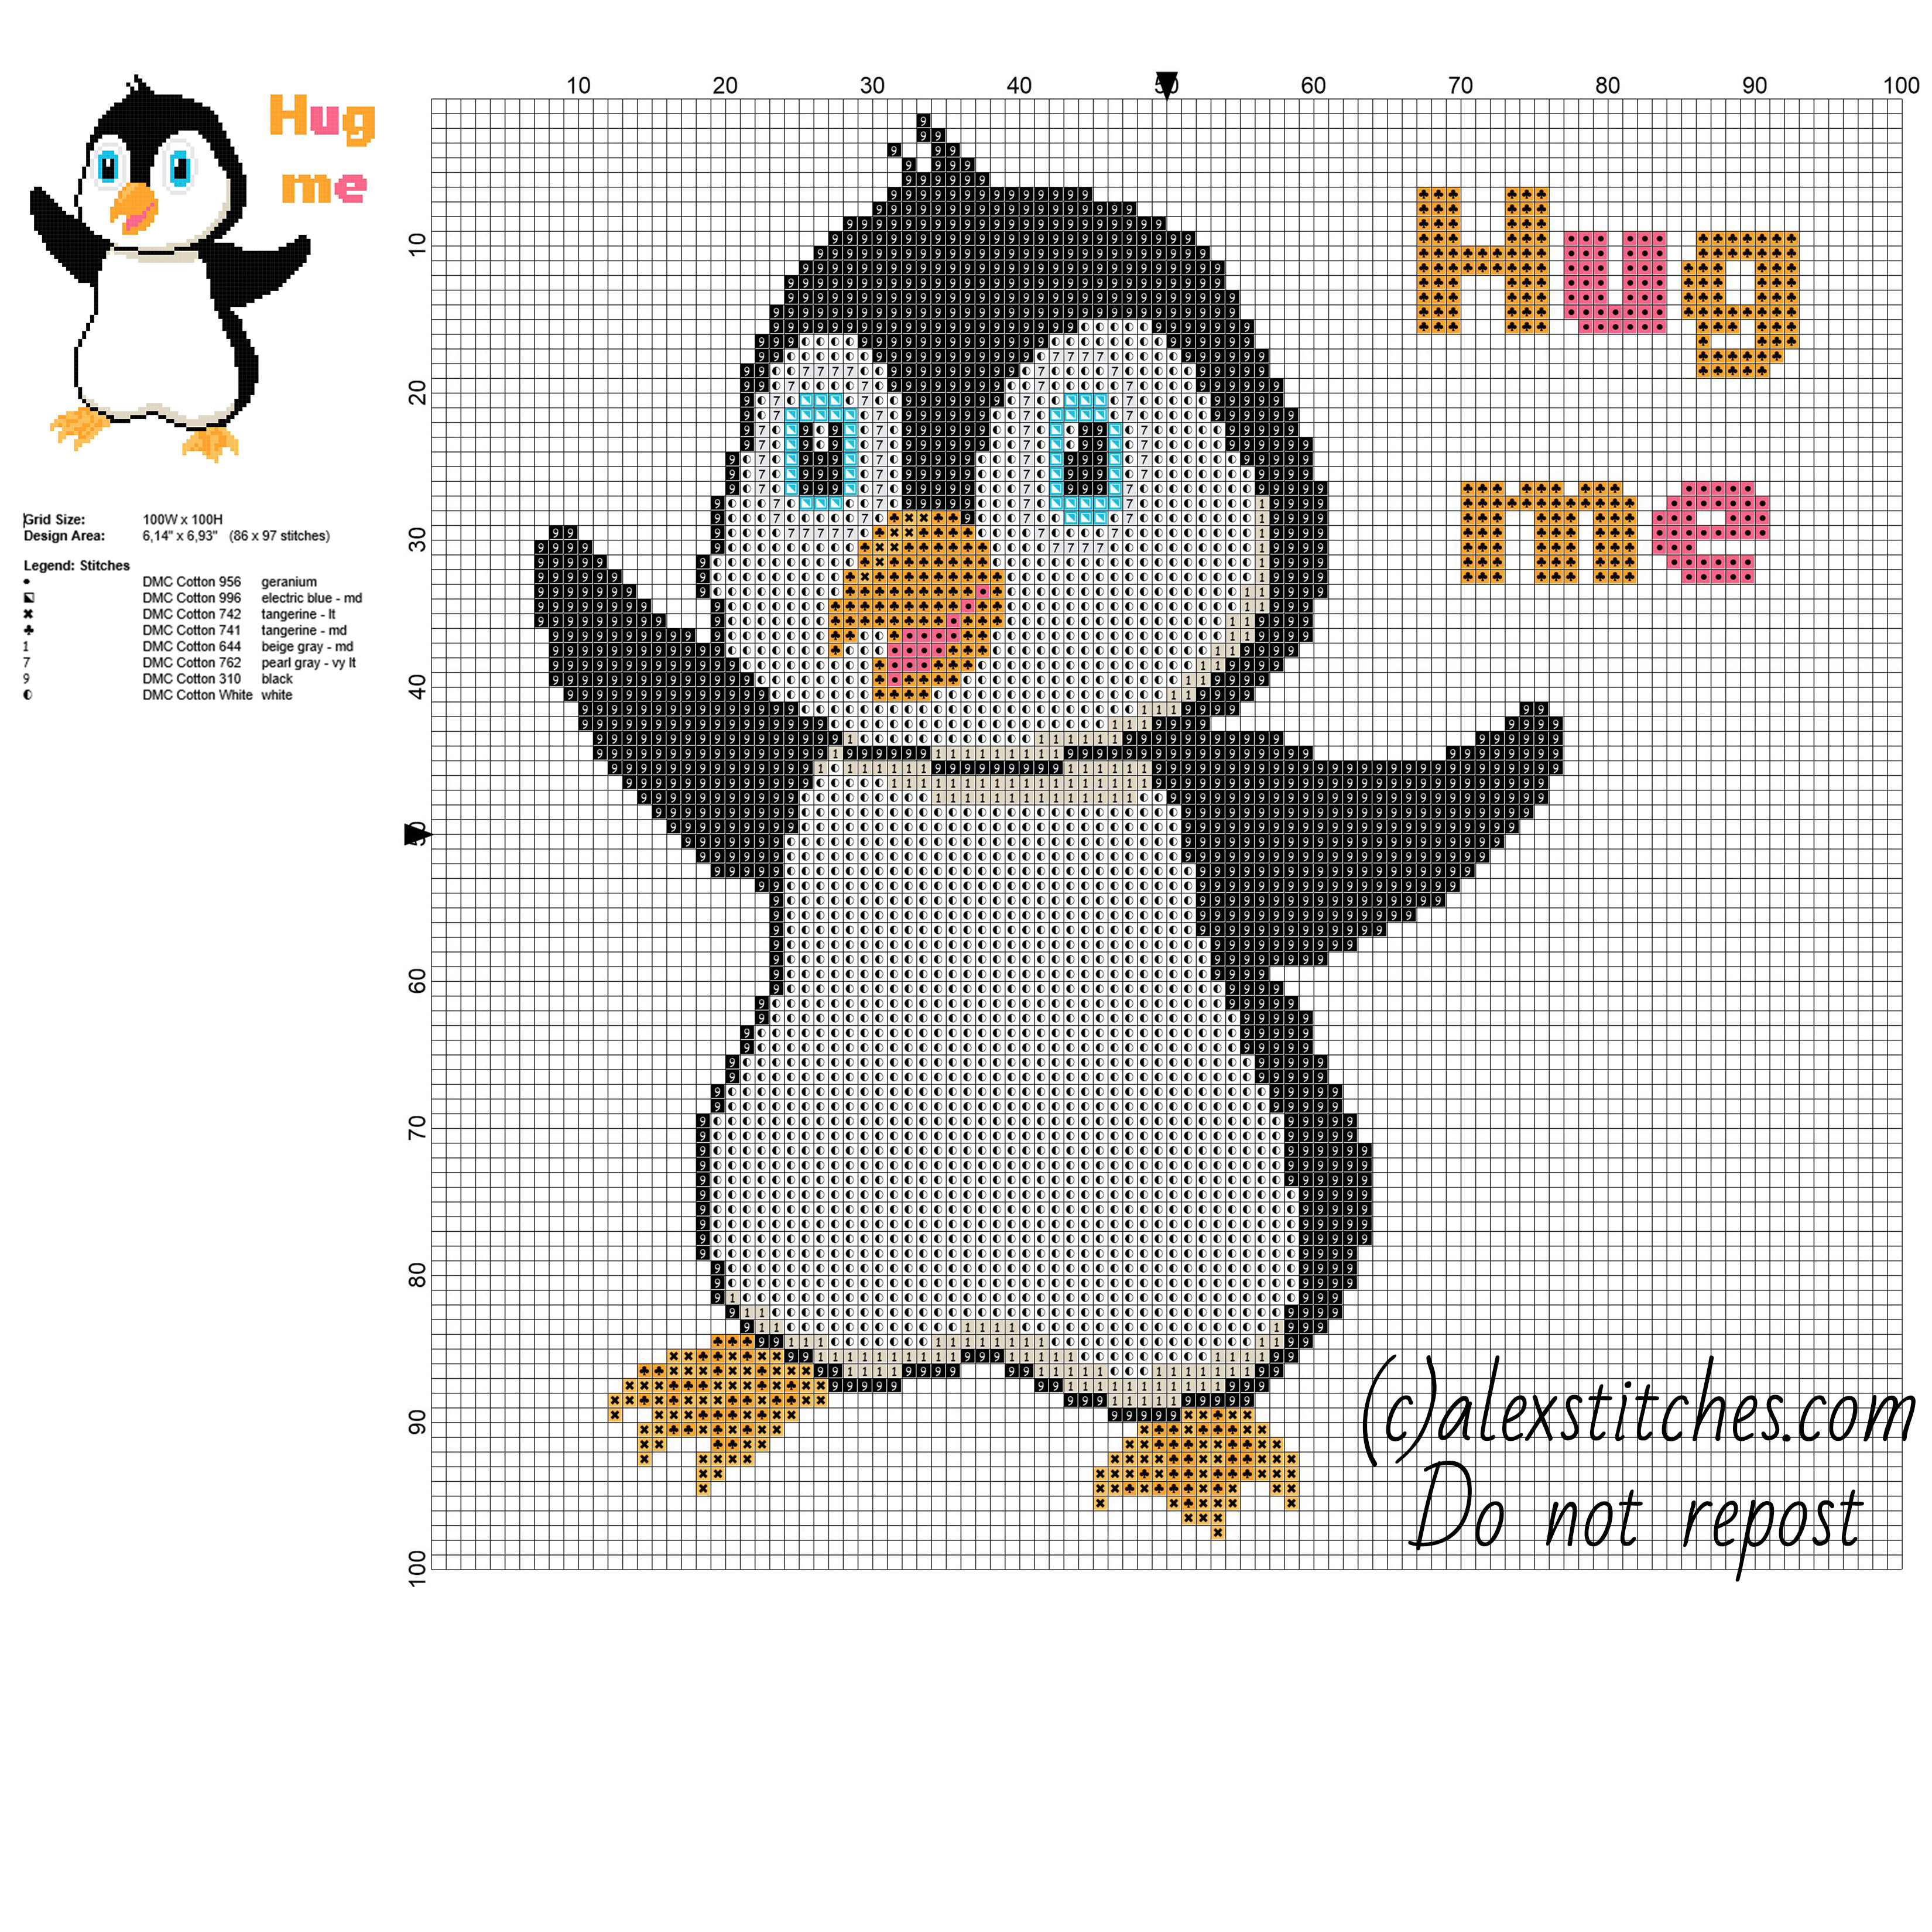 Cute baby animal penguin with text hug me free cross stitch pattern 86 x 97  stitches 8 DMC threads - free cross stitch patterns by Alex